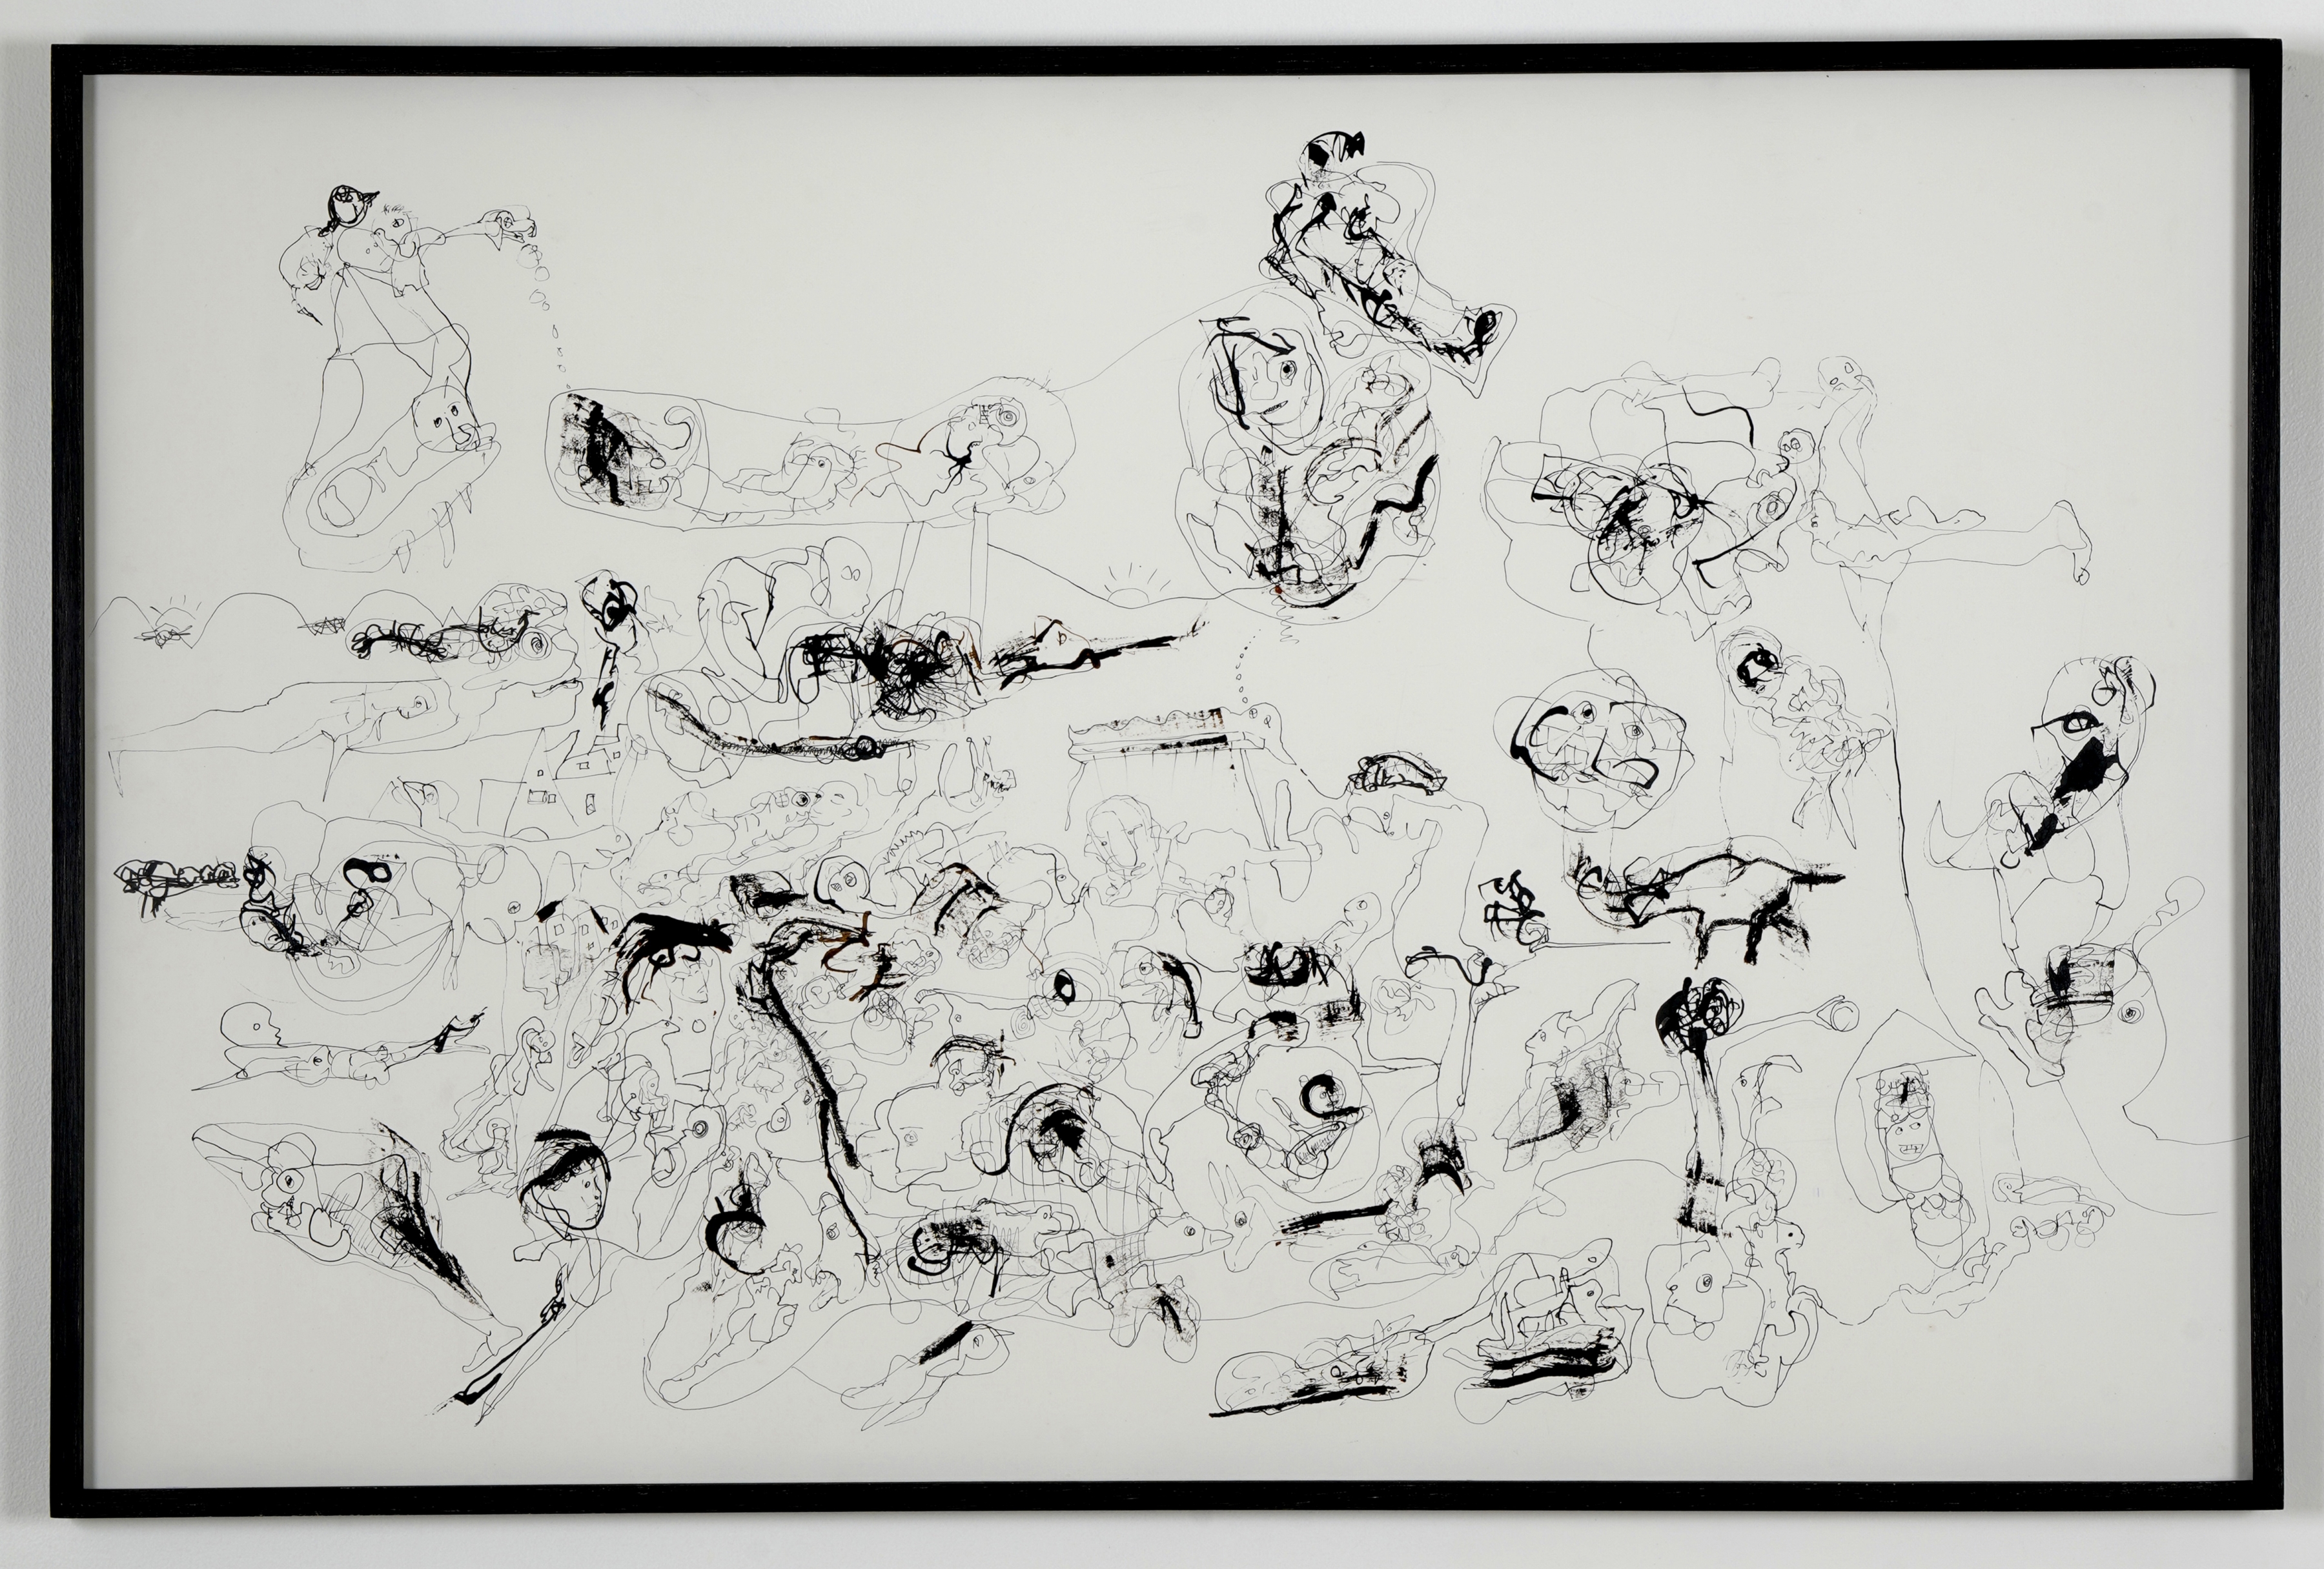 P.R. SATHEESH, Untitled (1), 2020, Indian ink on paper,&amp;nbsp;26.1 x 40 in / 66.5 x 101.5 cm